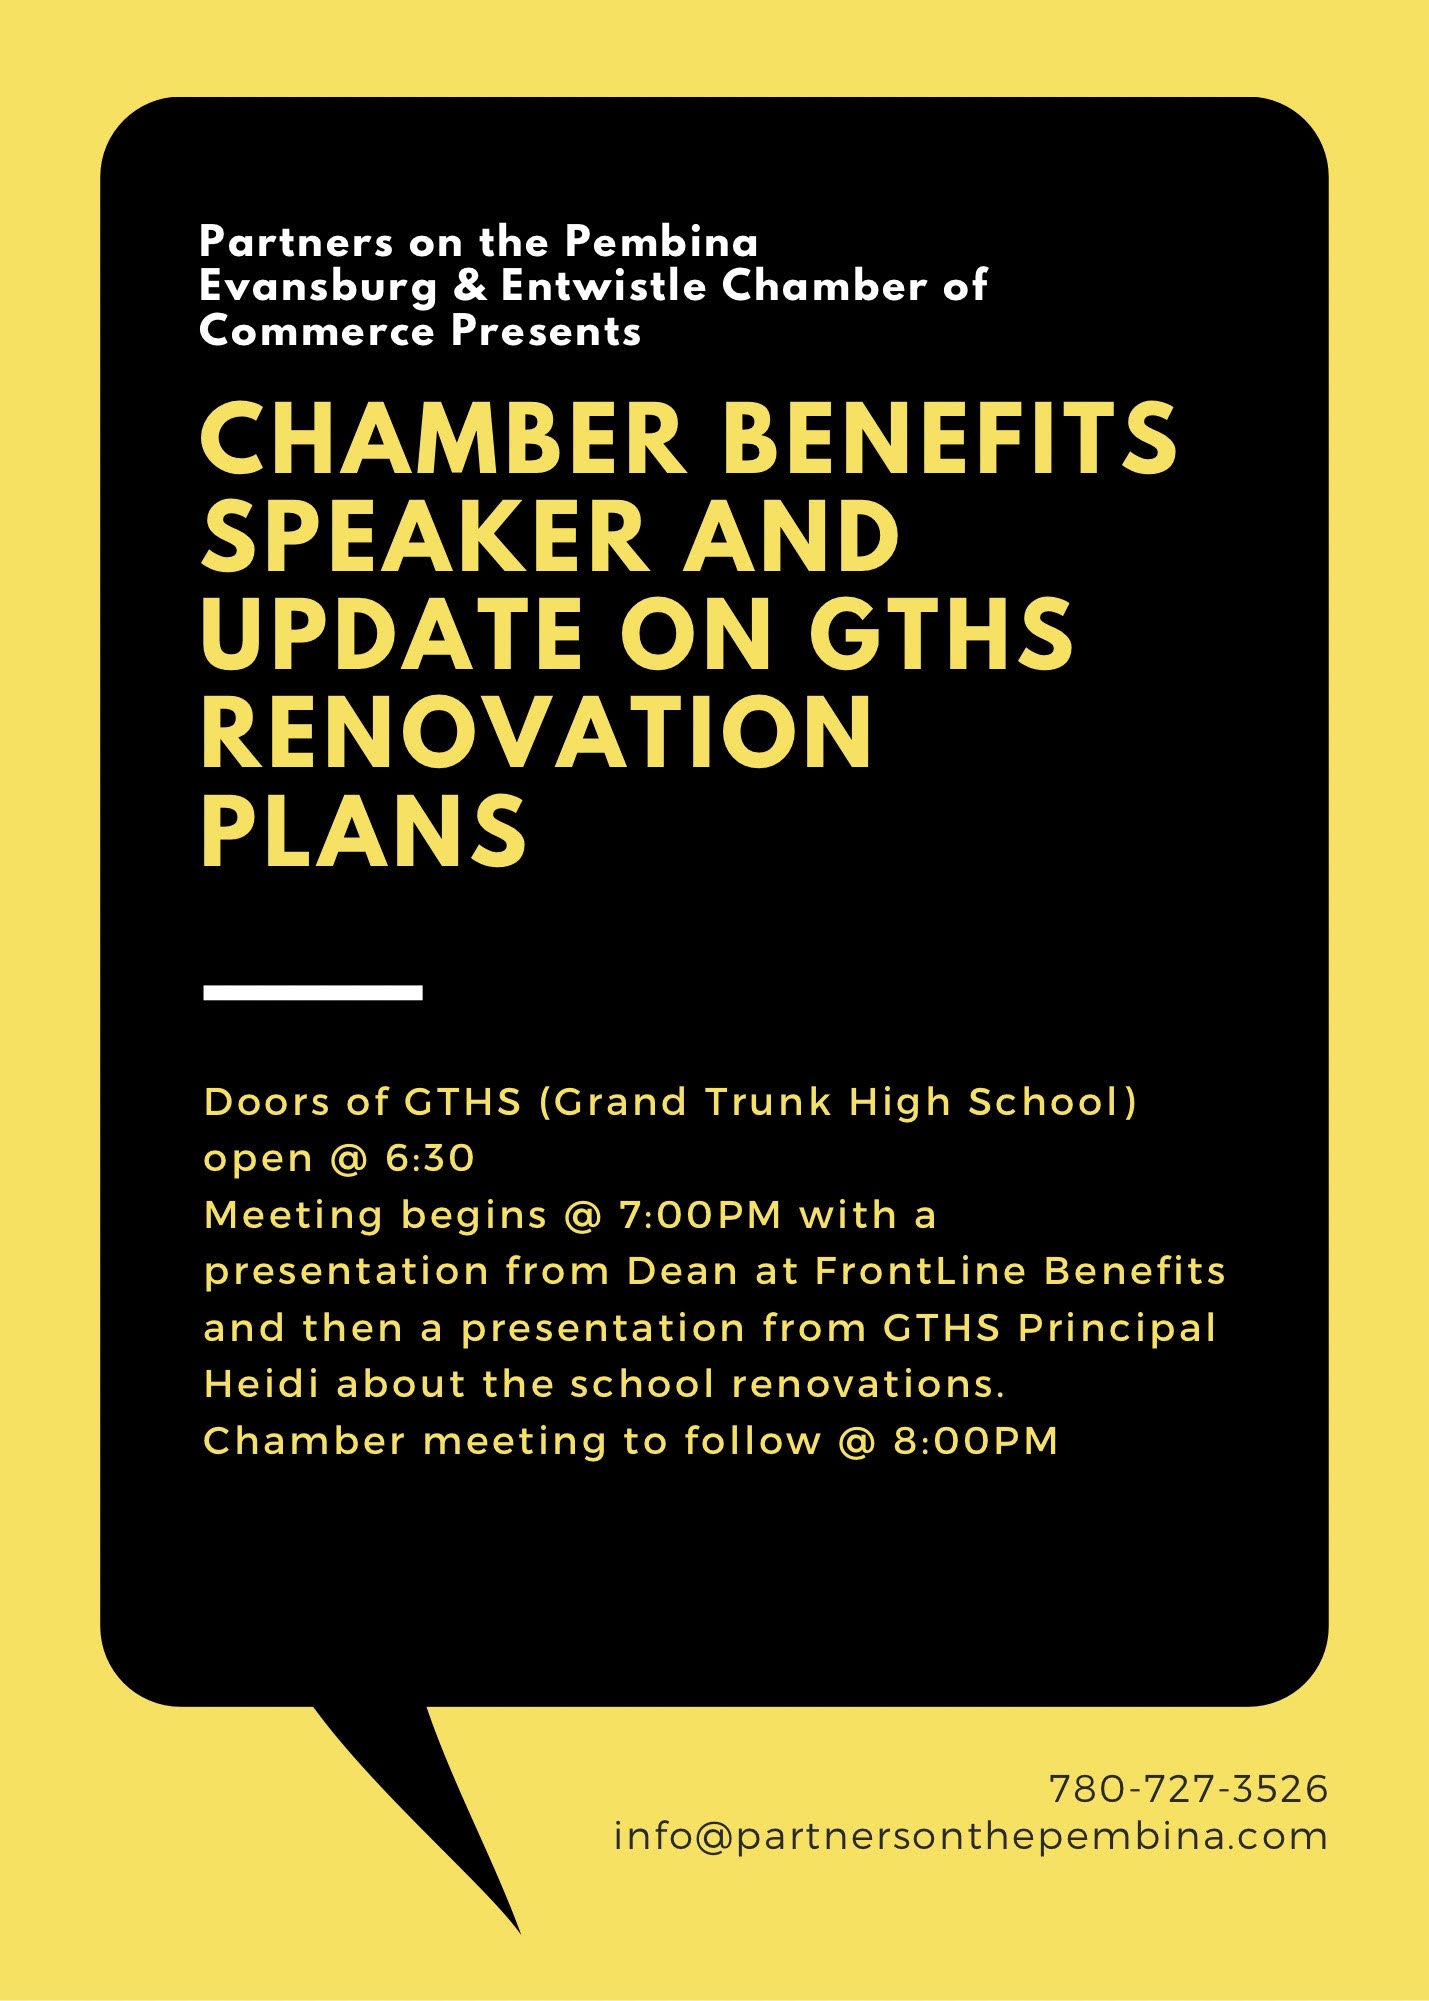 Chamber Benefits Speaker and Update on the Grand Trunk High School  Renovation Plans - Evansburg Entwistle Chamber of Commerce